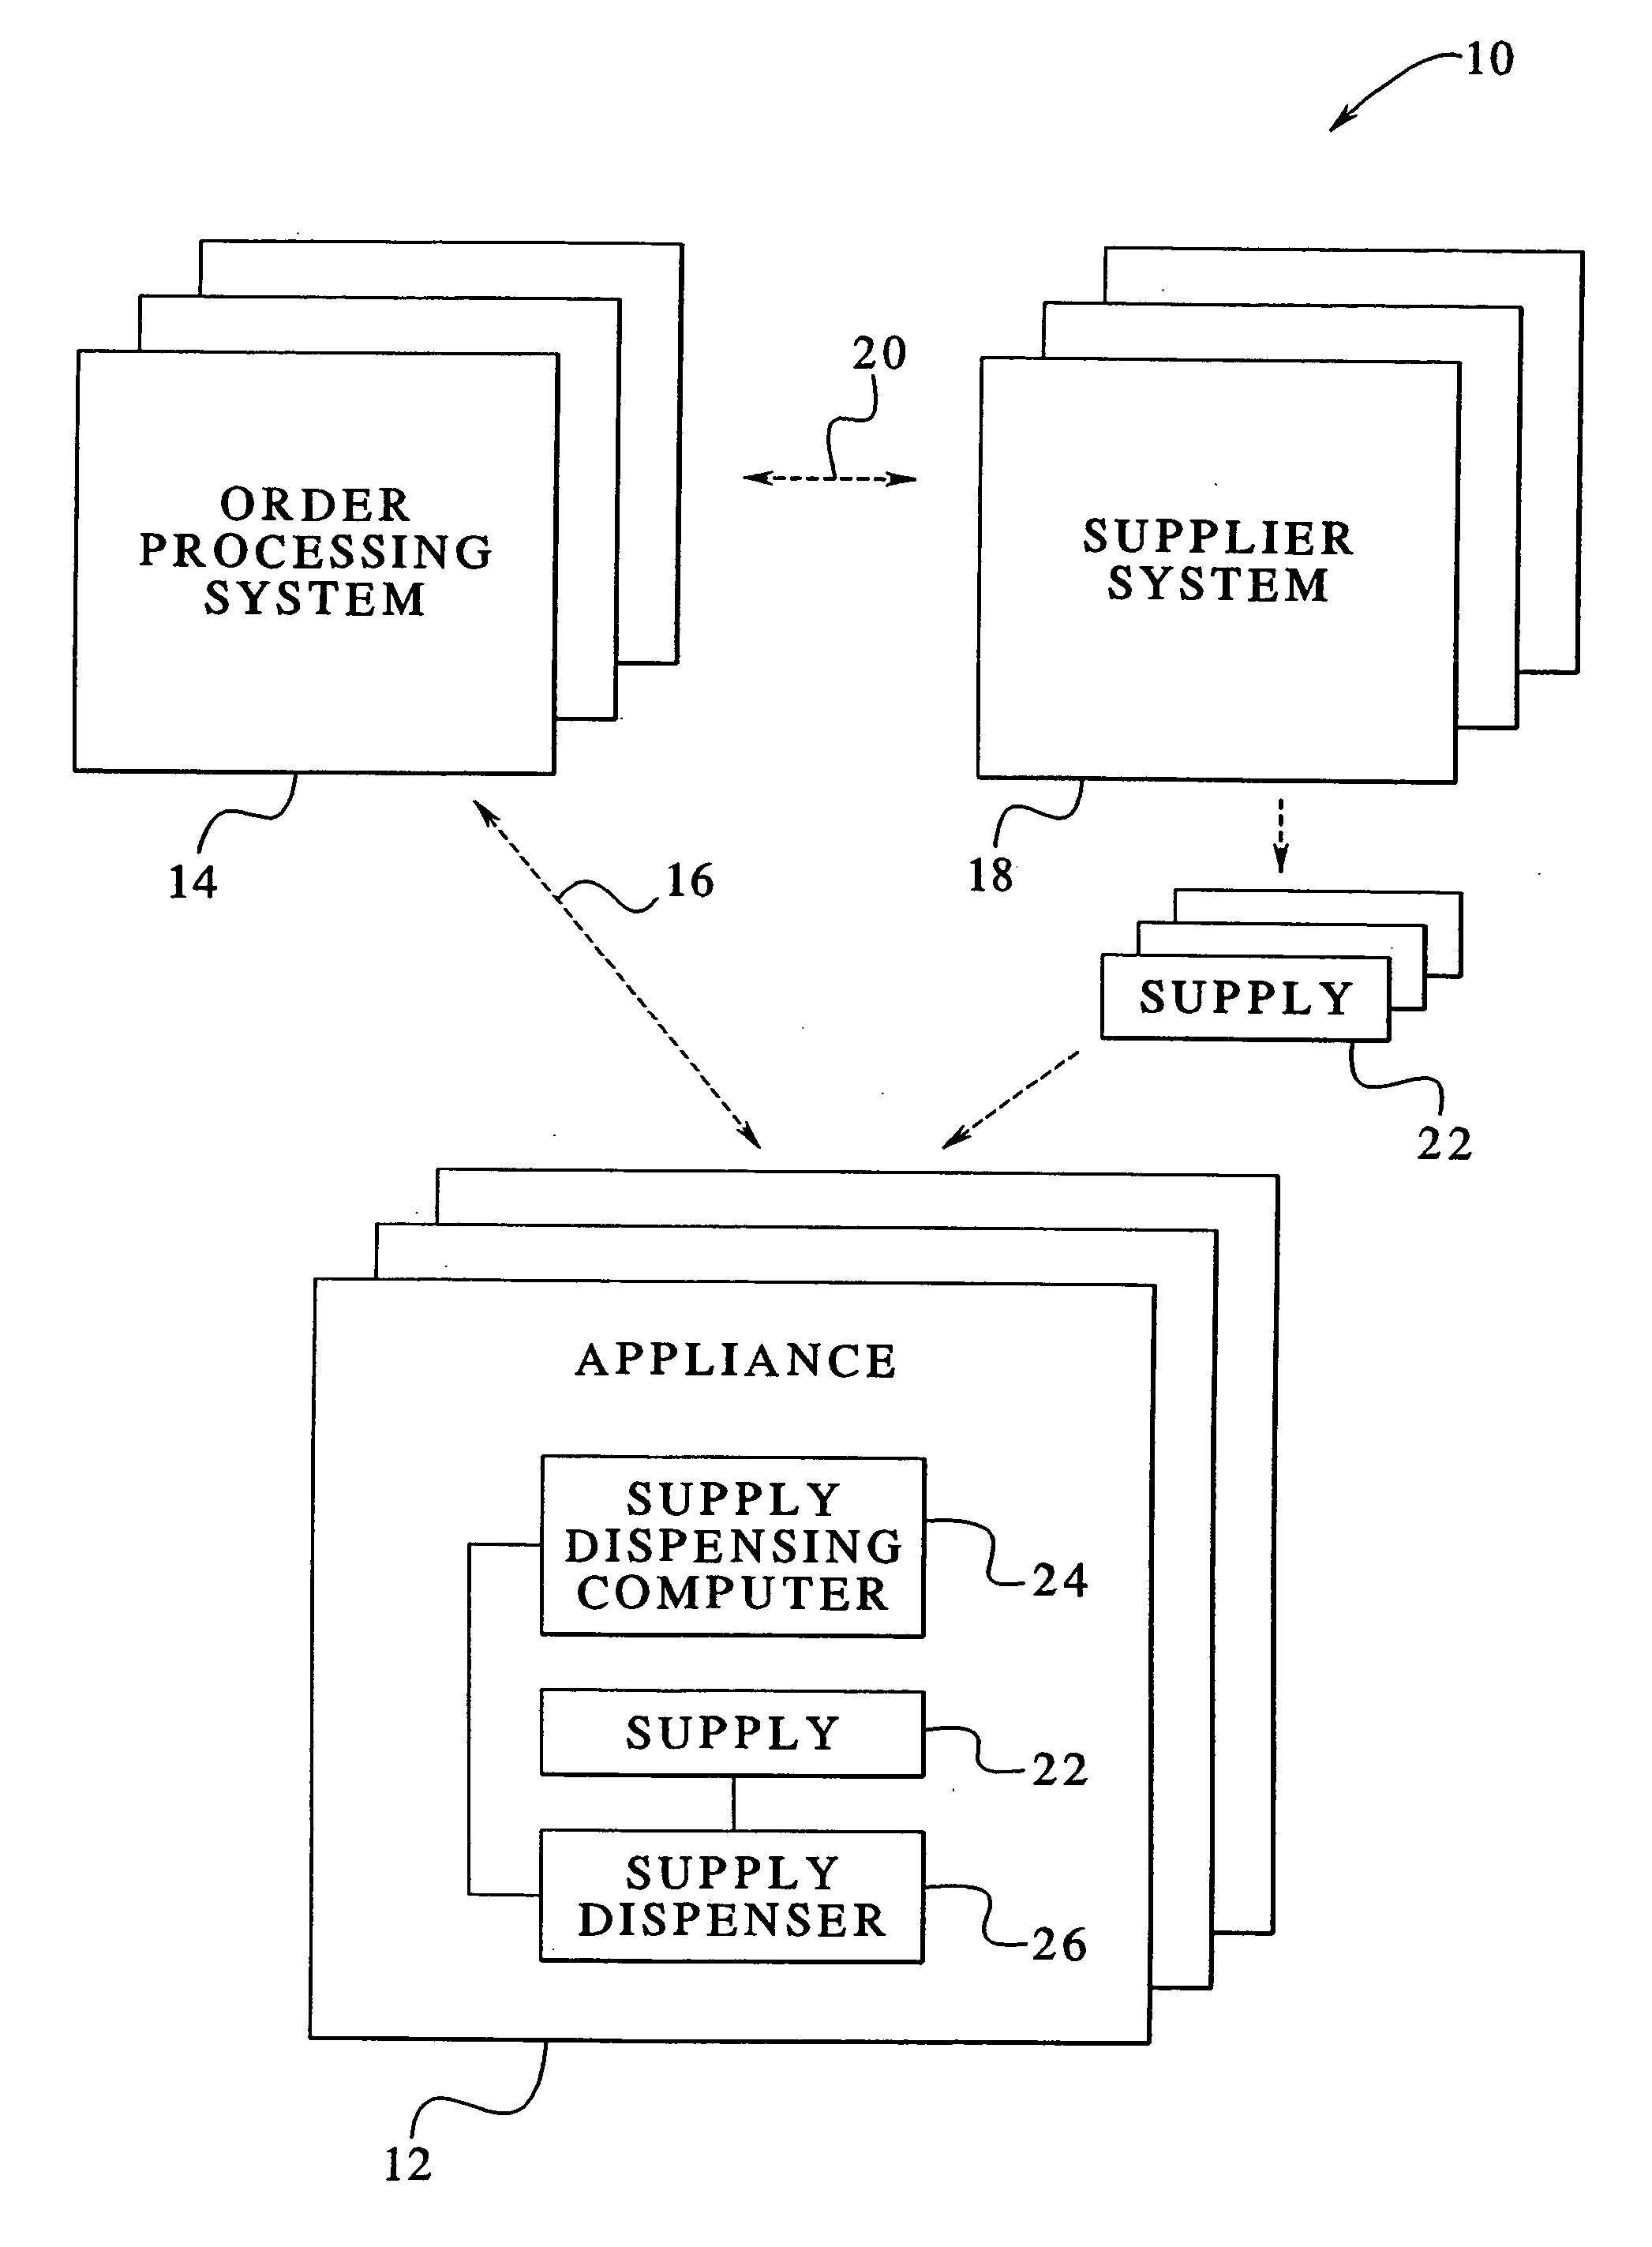 Washing machine operable with supply distribution, dispensing and use system method